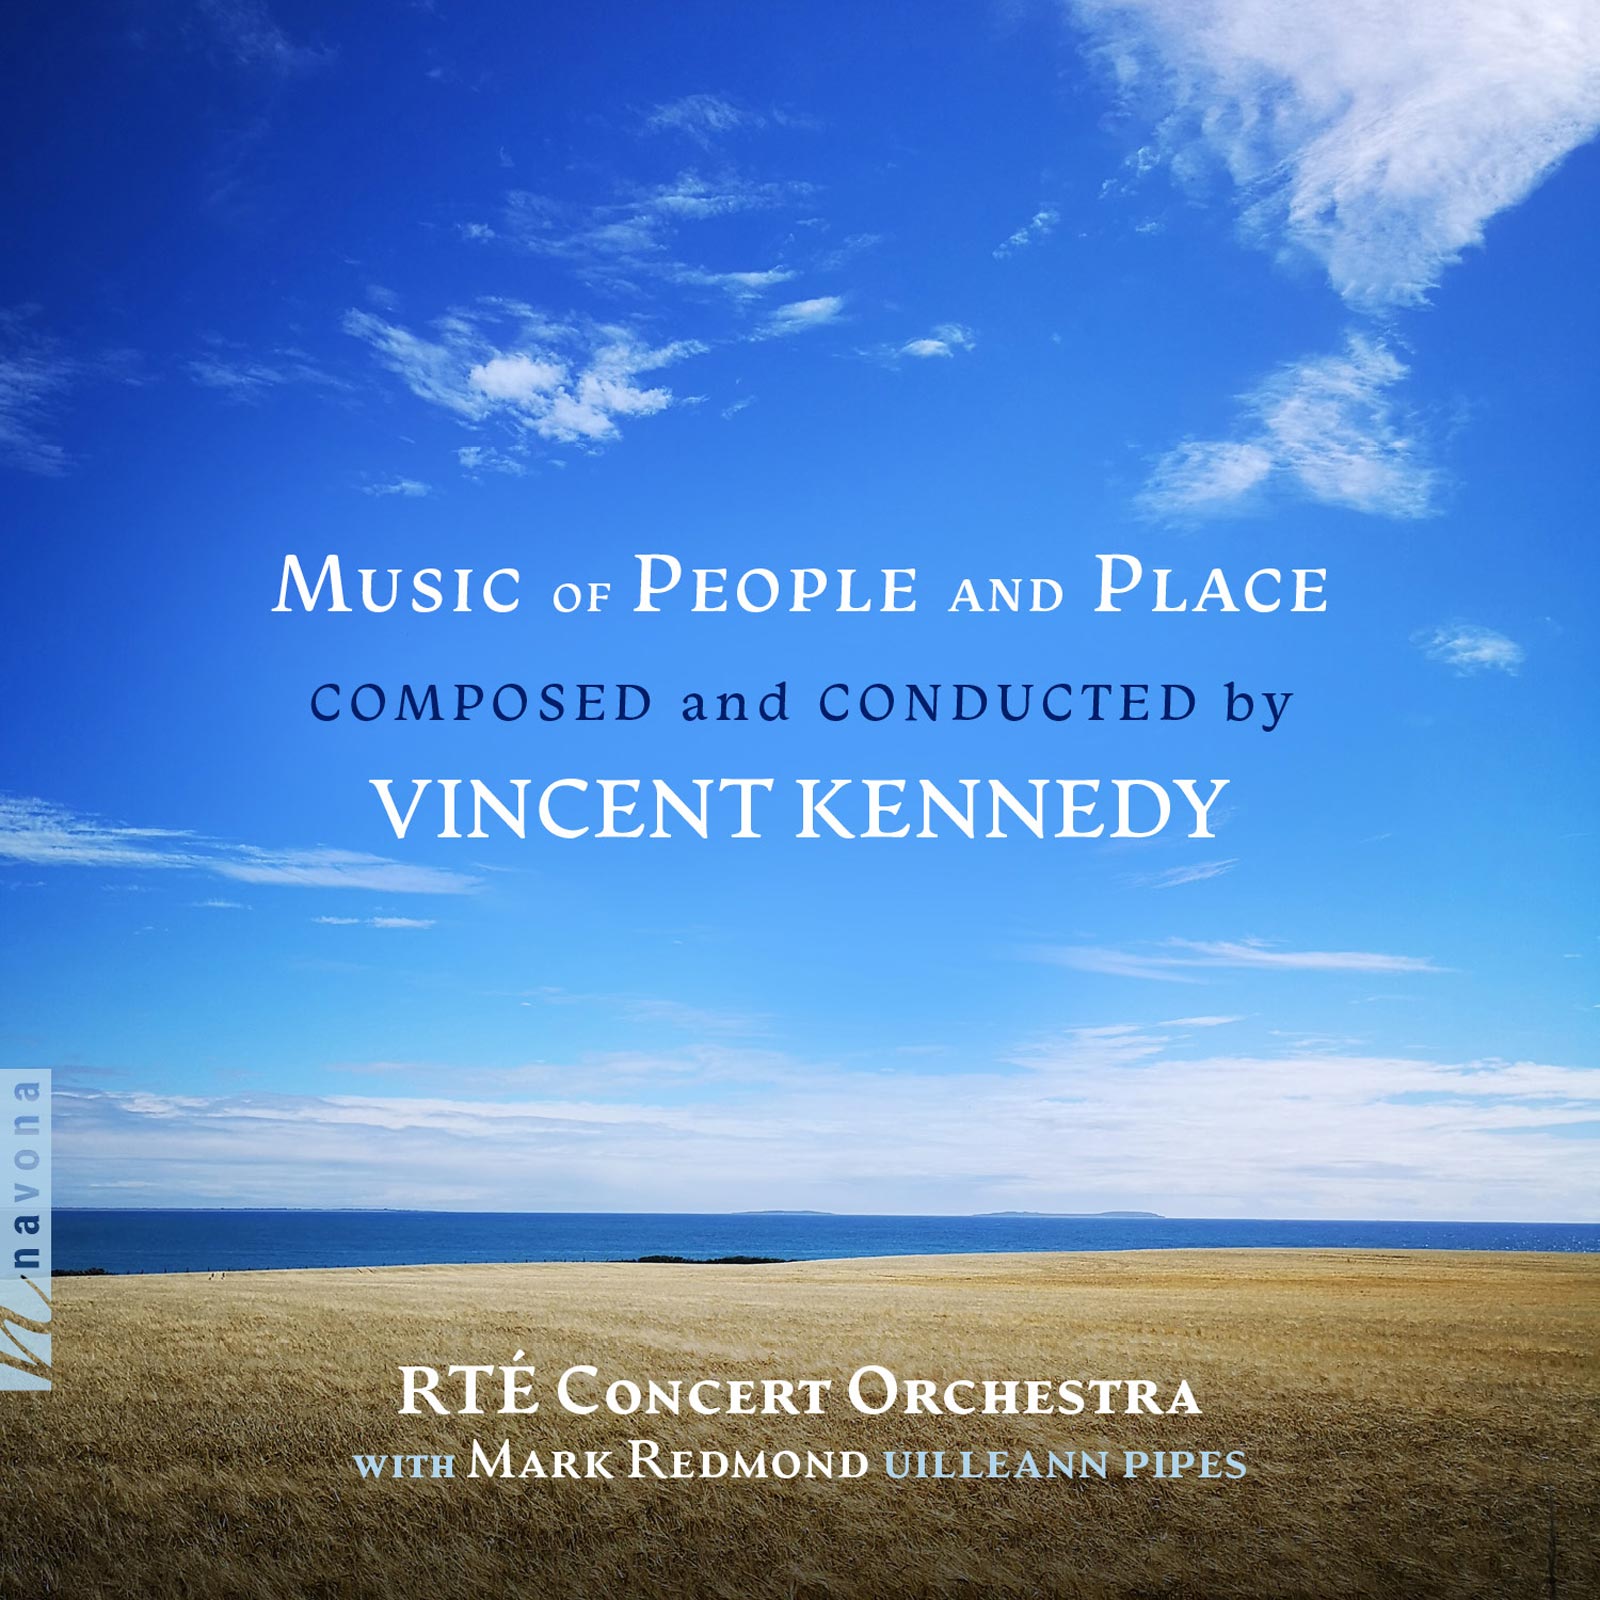 MUSIC OF PEOPLE AND PLACE